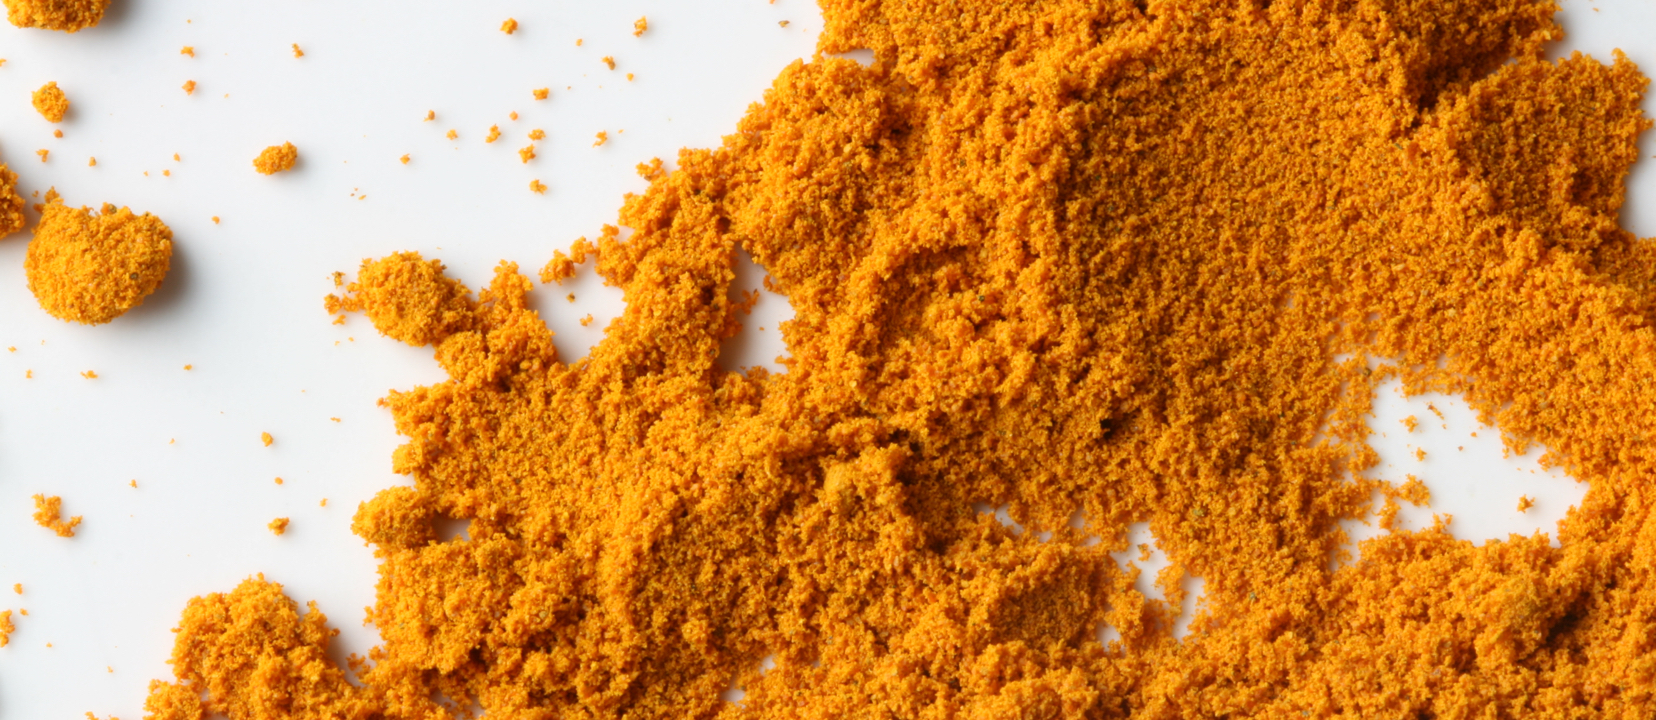 Can Turmeric Help with Alzheimer’s?